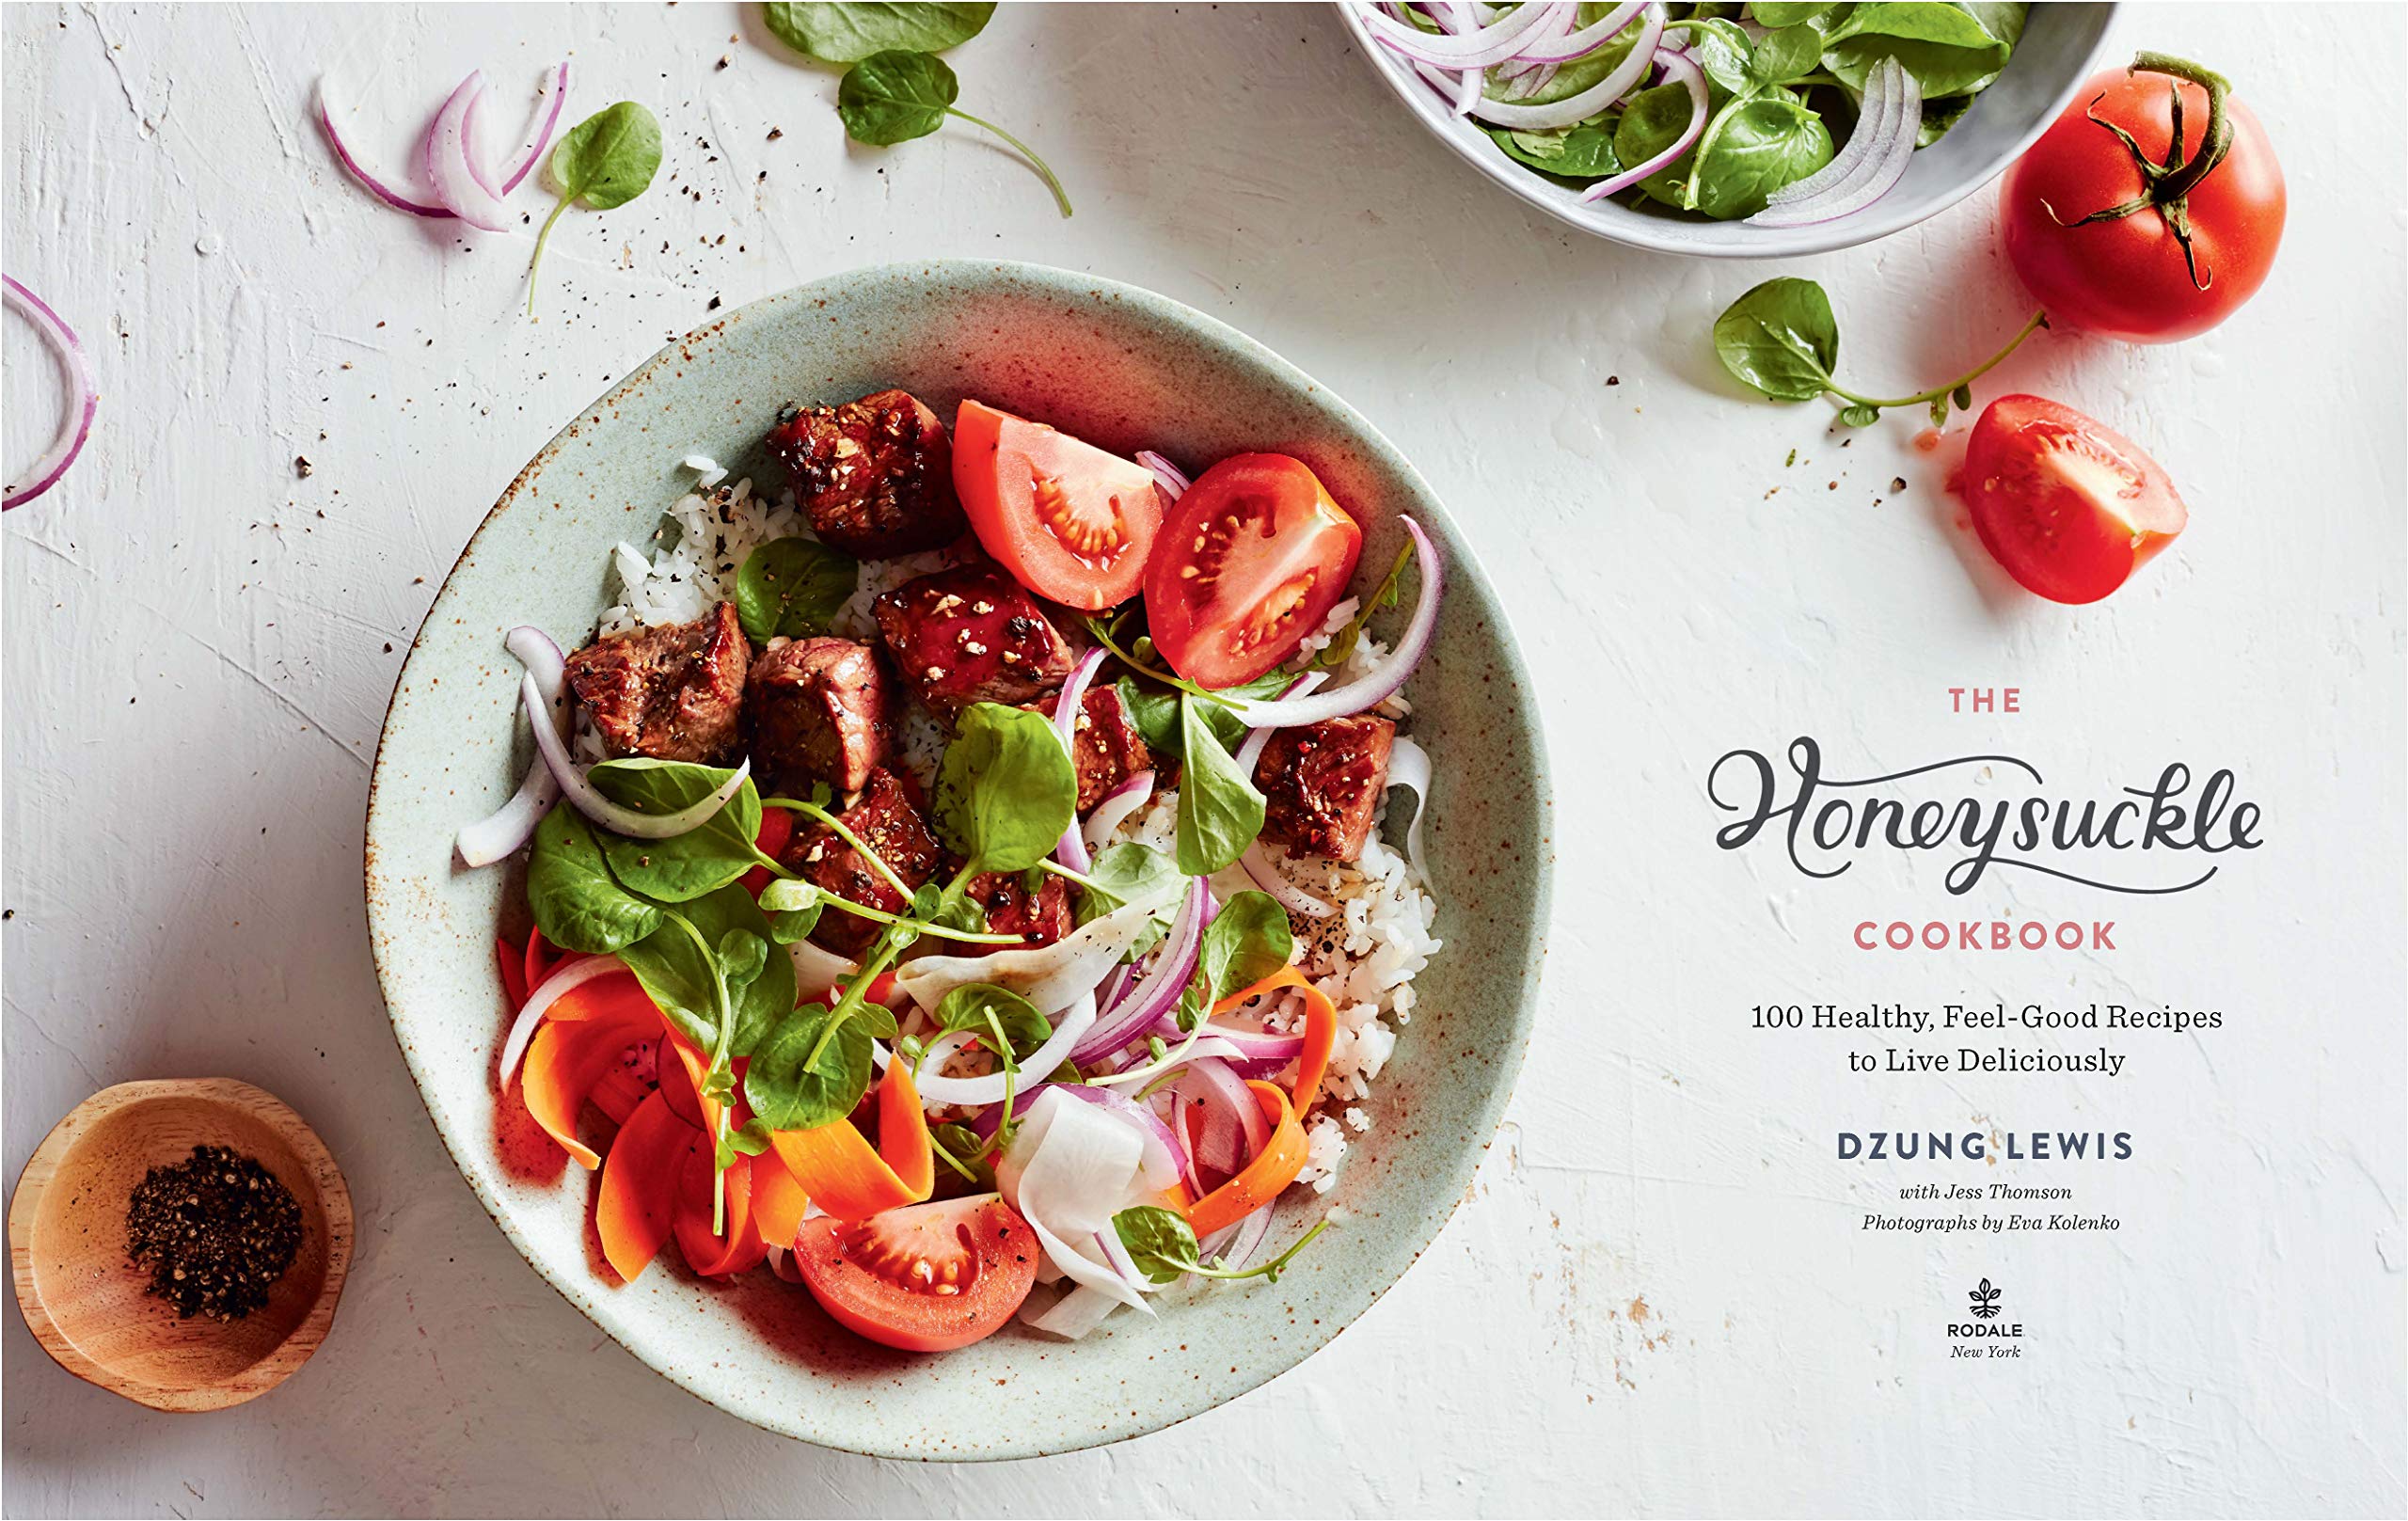 The Honeysuckle Cookbook: 100 Healthy, Feel-Good Recipes to Live Deliciously